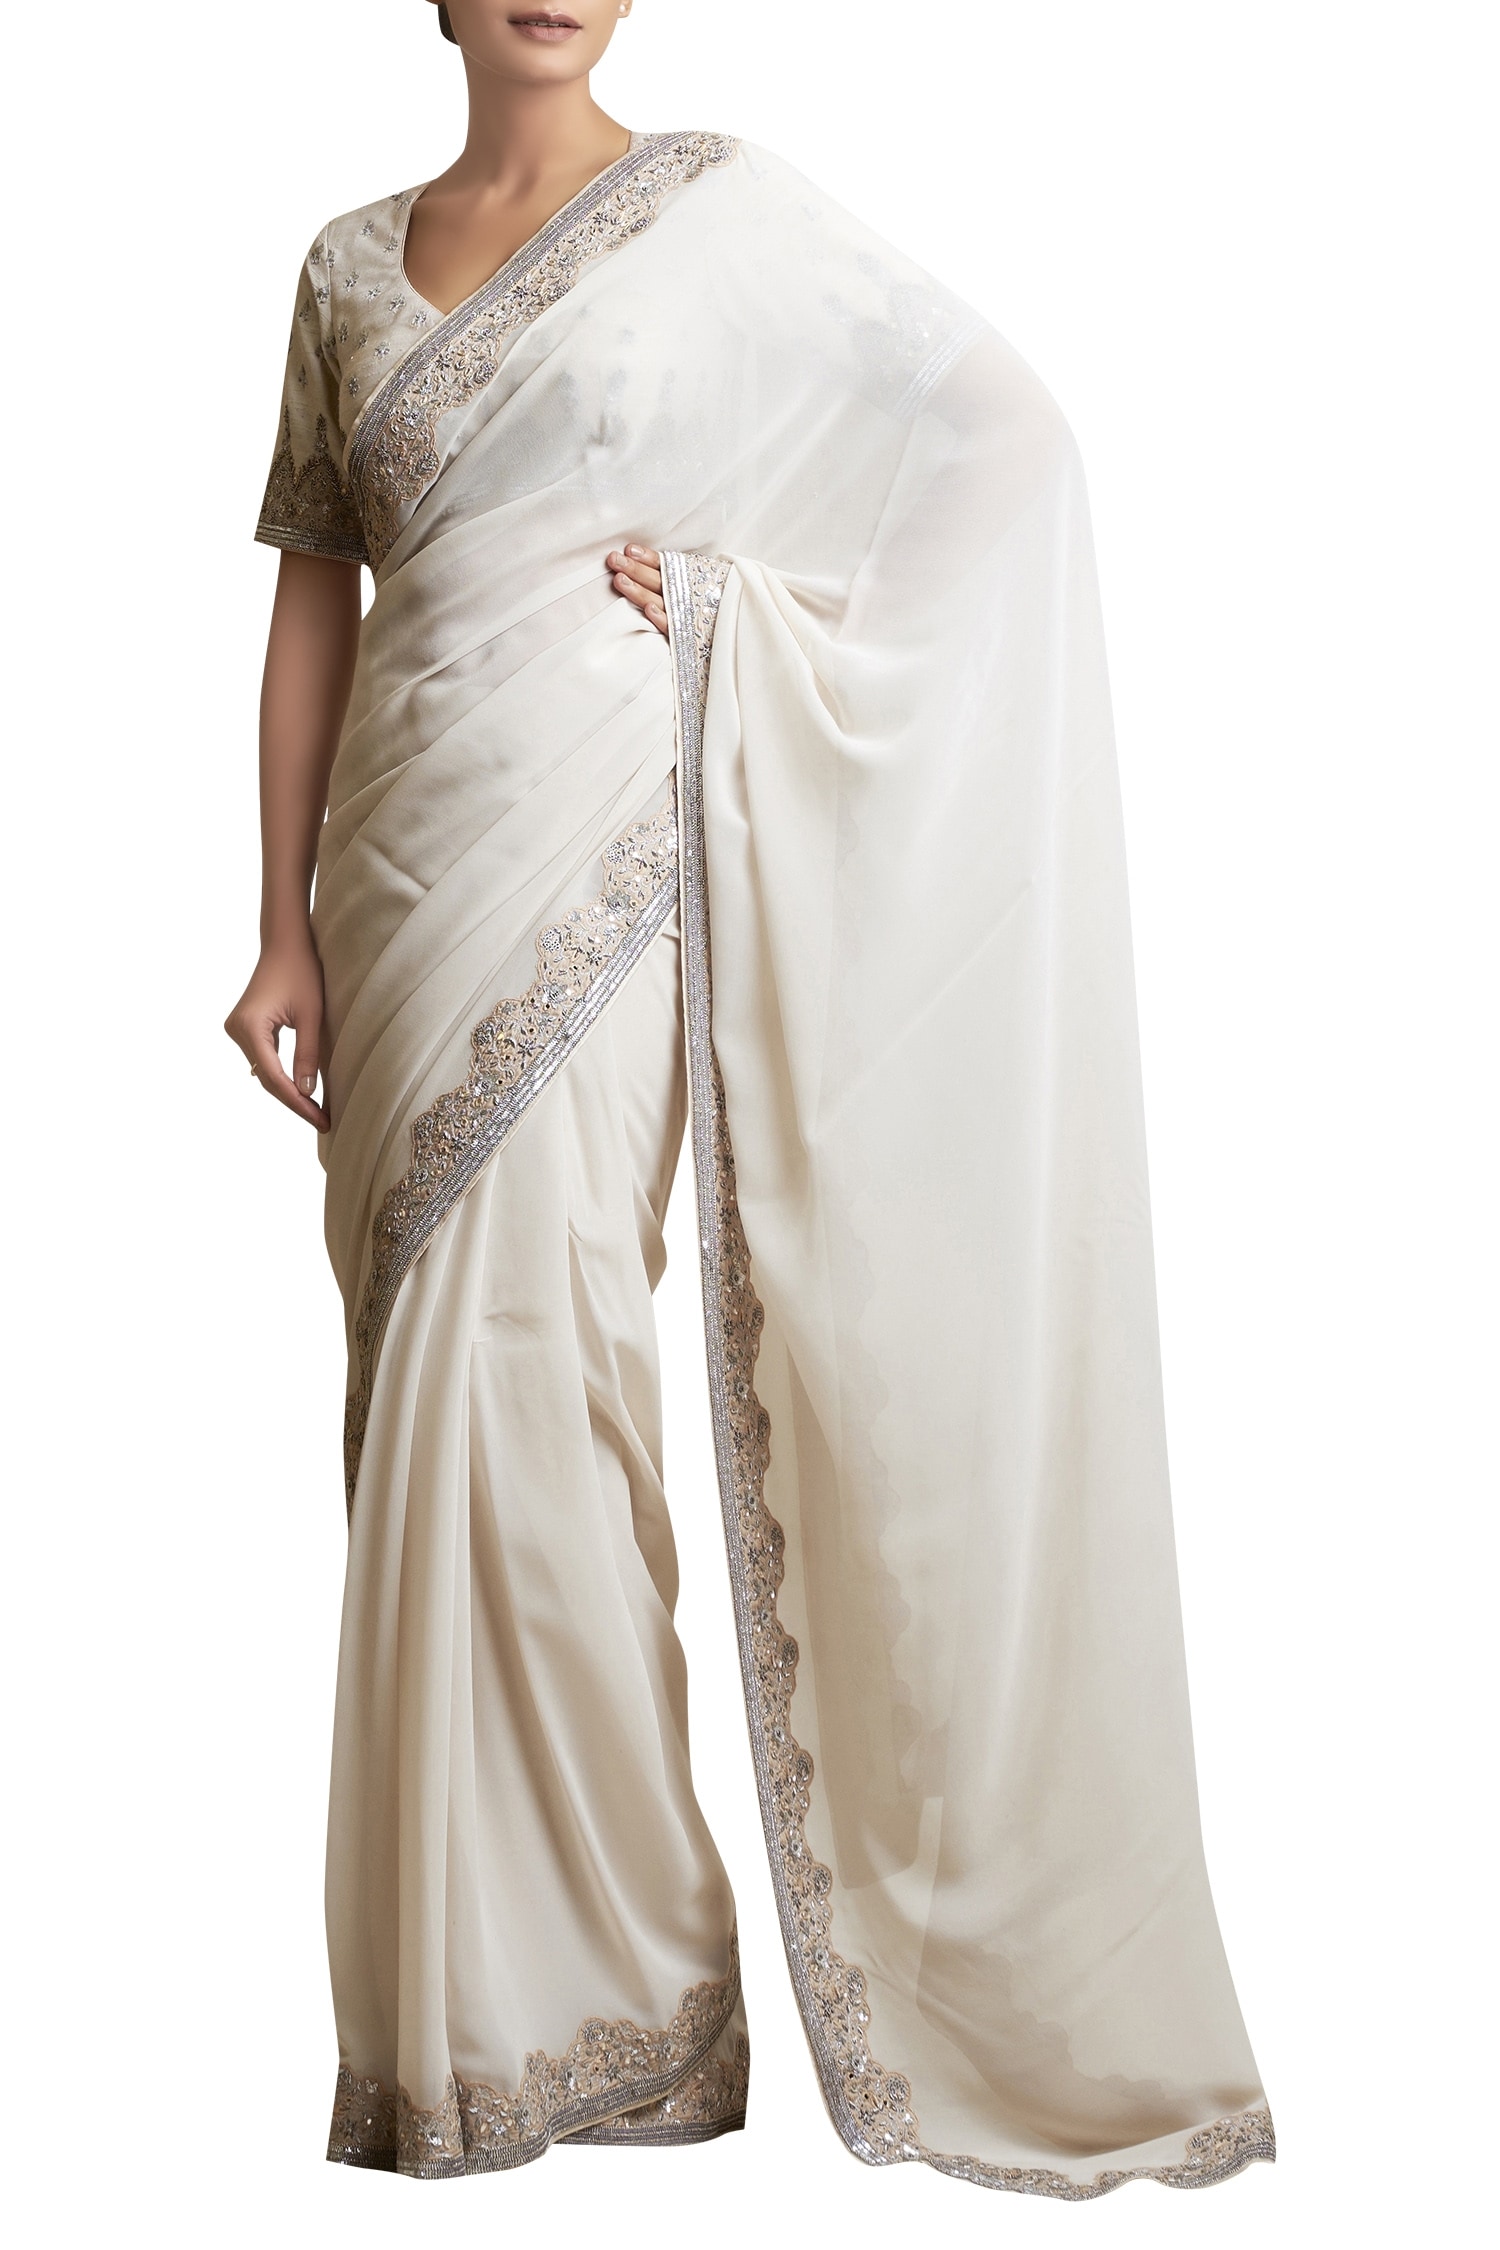 Sue Mue Off White Saree With Embellished Border And Blouse